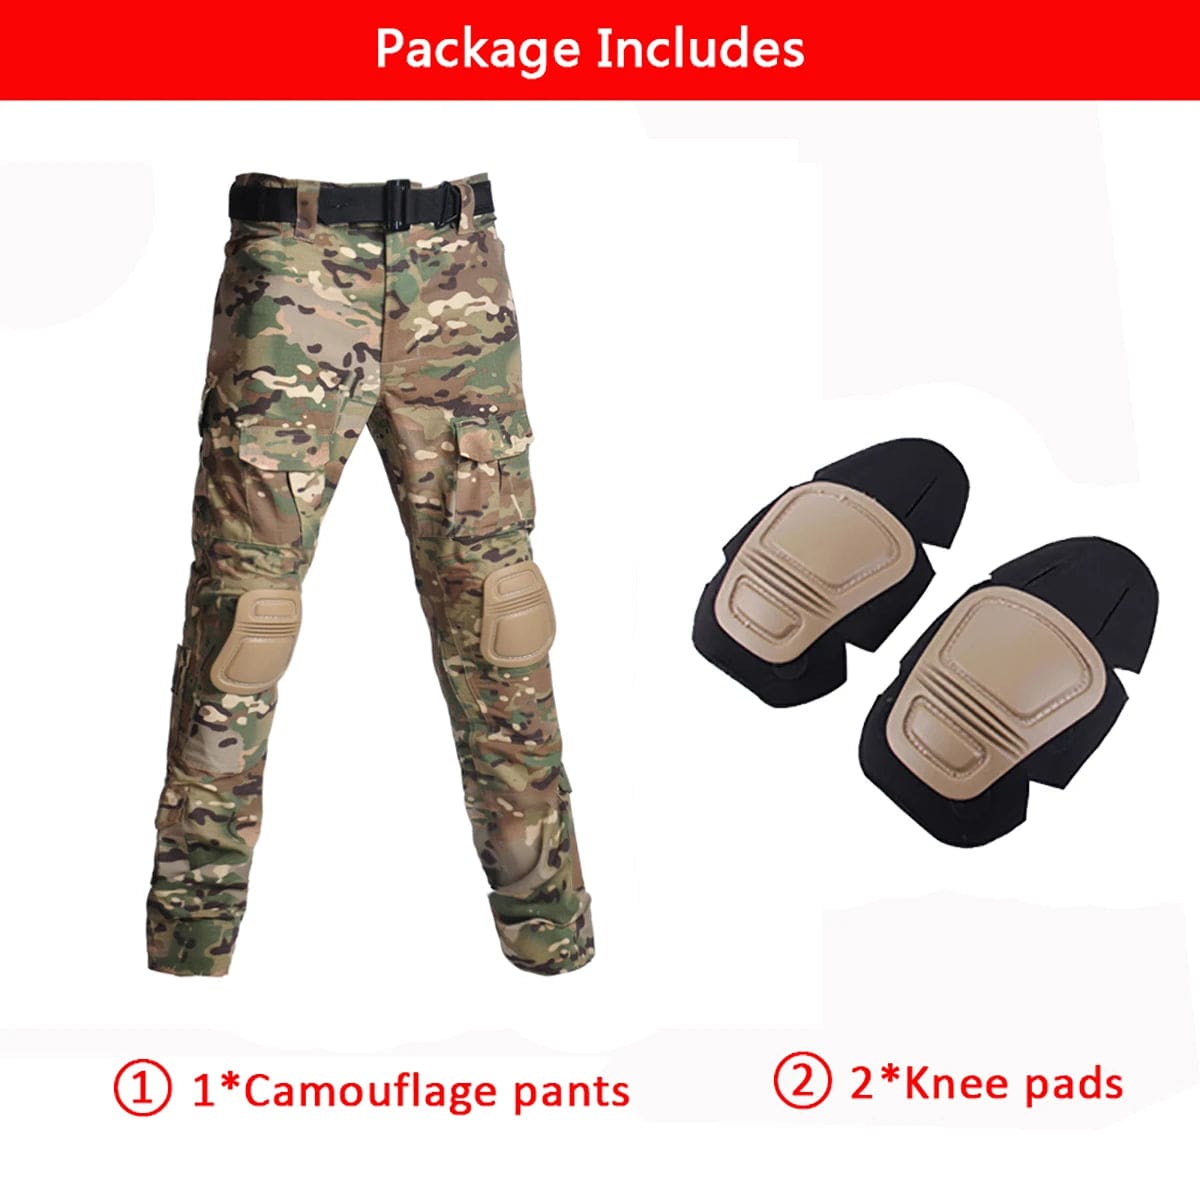 ACTION AIRSOFT CP / S(50-60kg) Airsoft Uniform Tactical Suits Army Camouflage Pants Military Clothing Hunting Clothes Paintball Suits Combat Shirt Pants +Pads